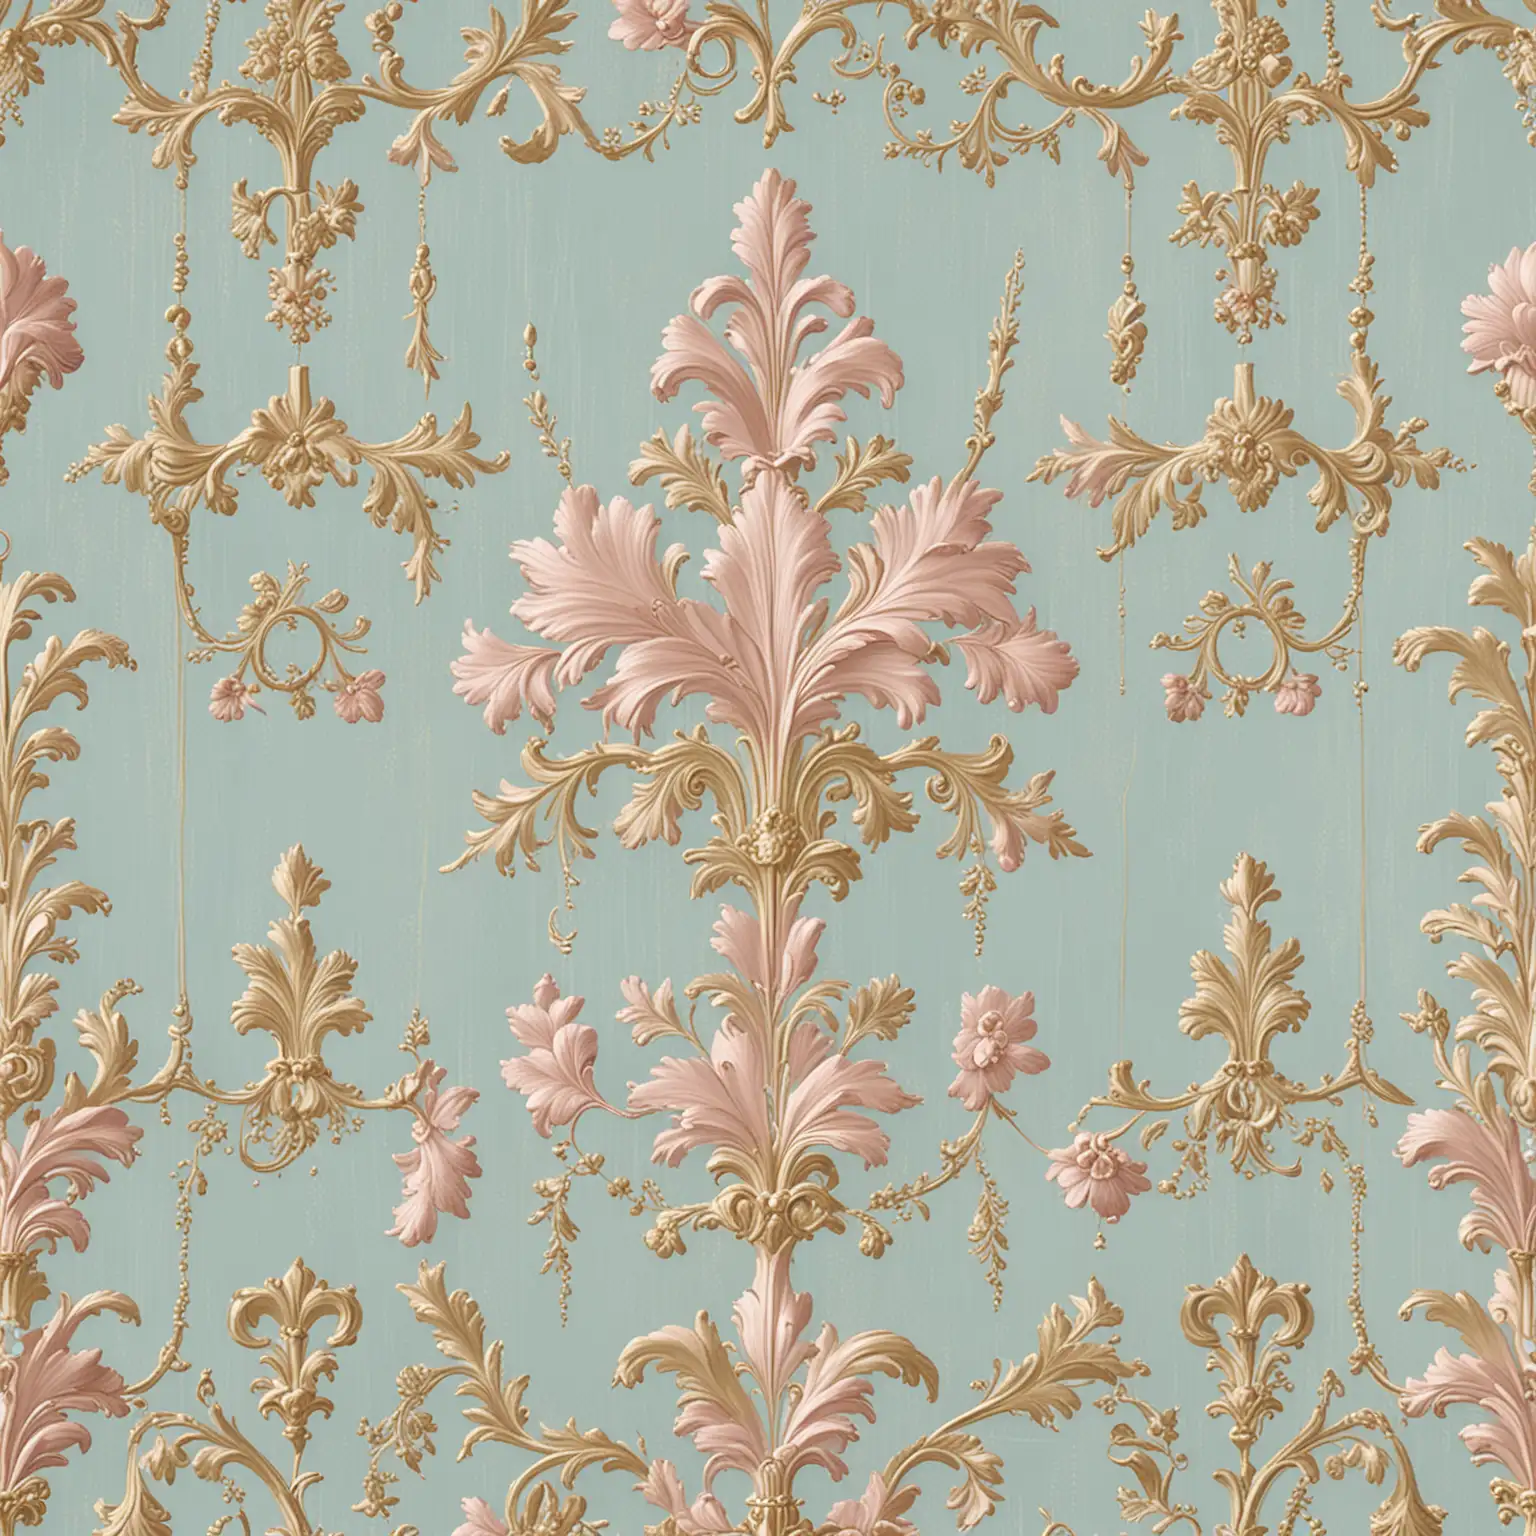 Elegant-Seamless-Silk-Wallpaper-with-Soft-Pastel-Tones-and-Gold-Accents